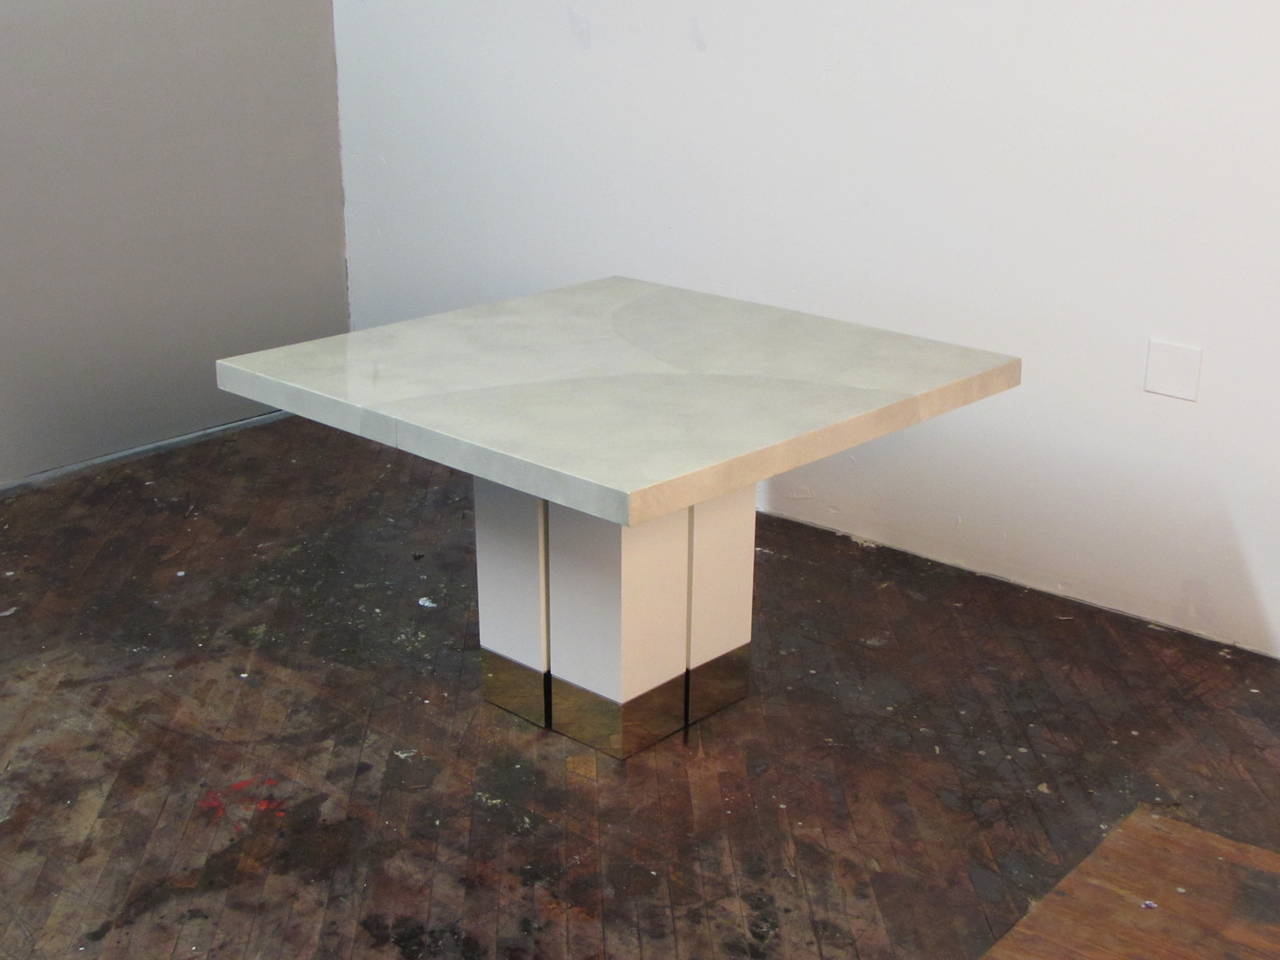 Handsome Italian goatskin or parchment dining table with brass details on white lacquered base in the manner of Karl Springer. This table is a perfect match for a small dining room or eat-in kitchen--seats 4 people. The quality and weight of the